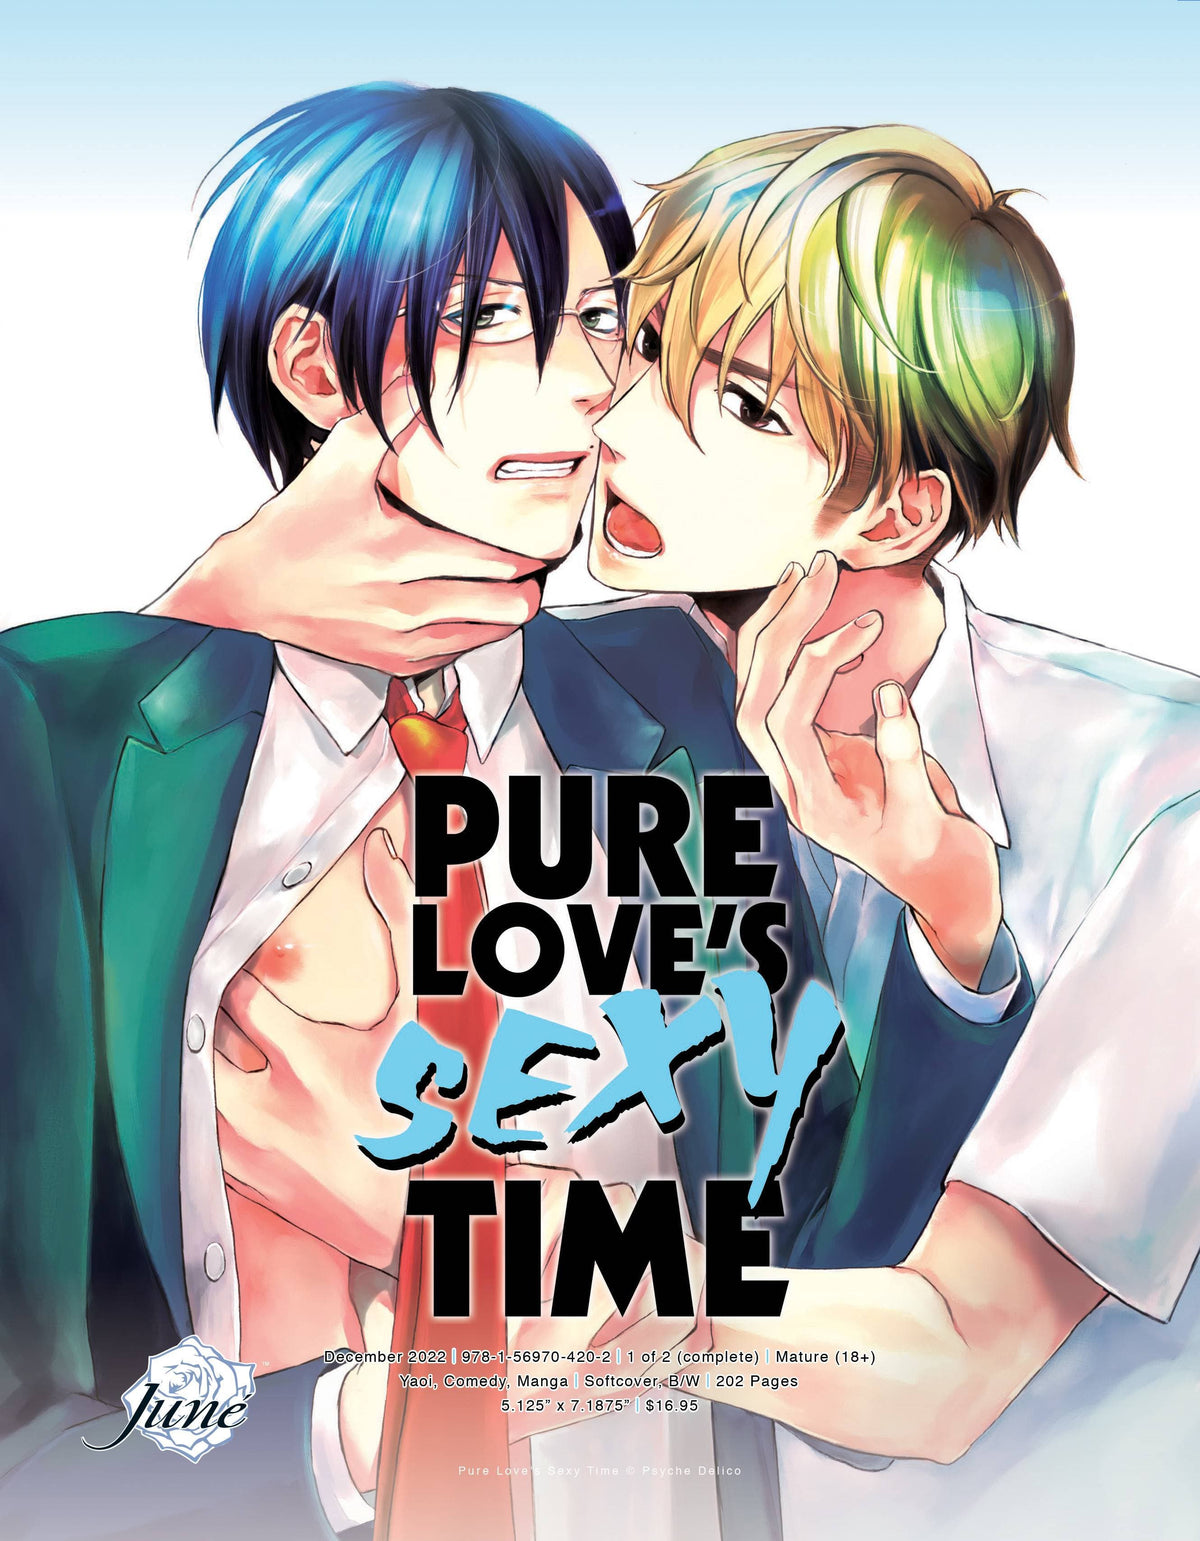 PURE LOVES SEXY TIME VOL 01 (OF 2) - Third Eye